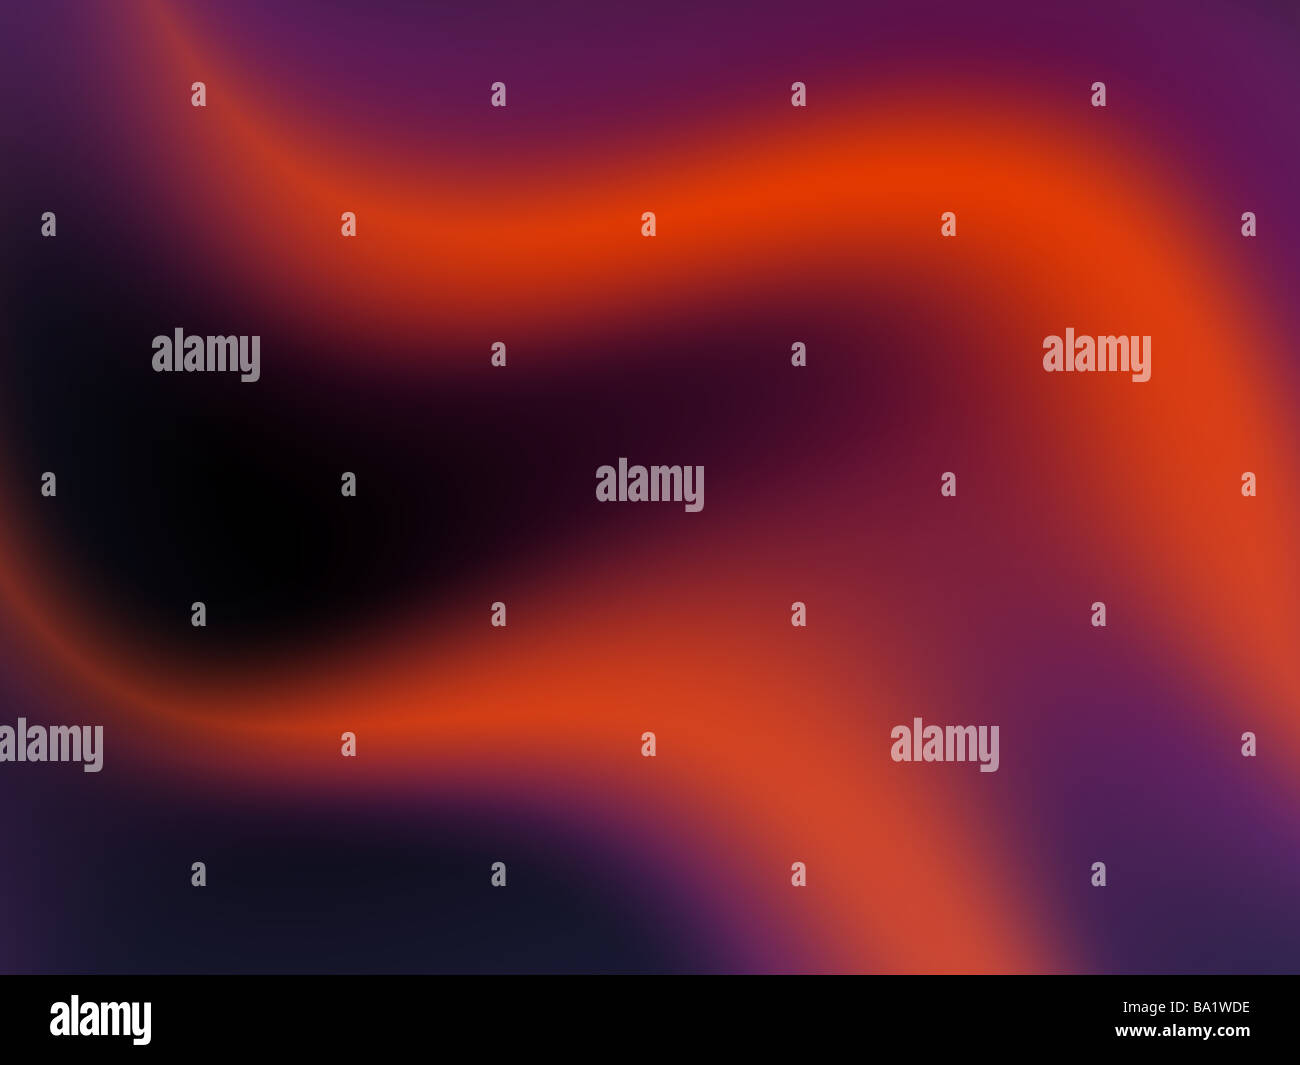 Abstract background of orange and purple waves Stock Photo